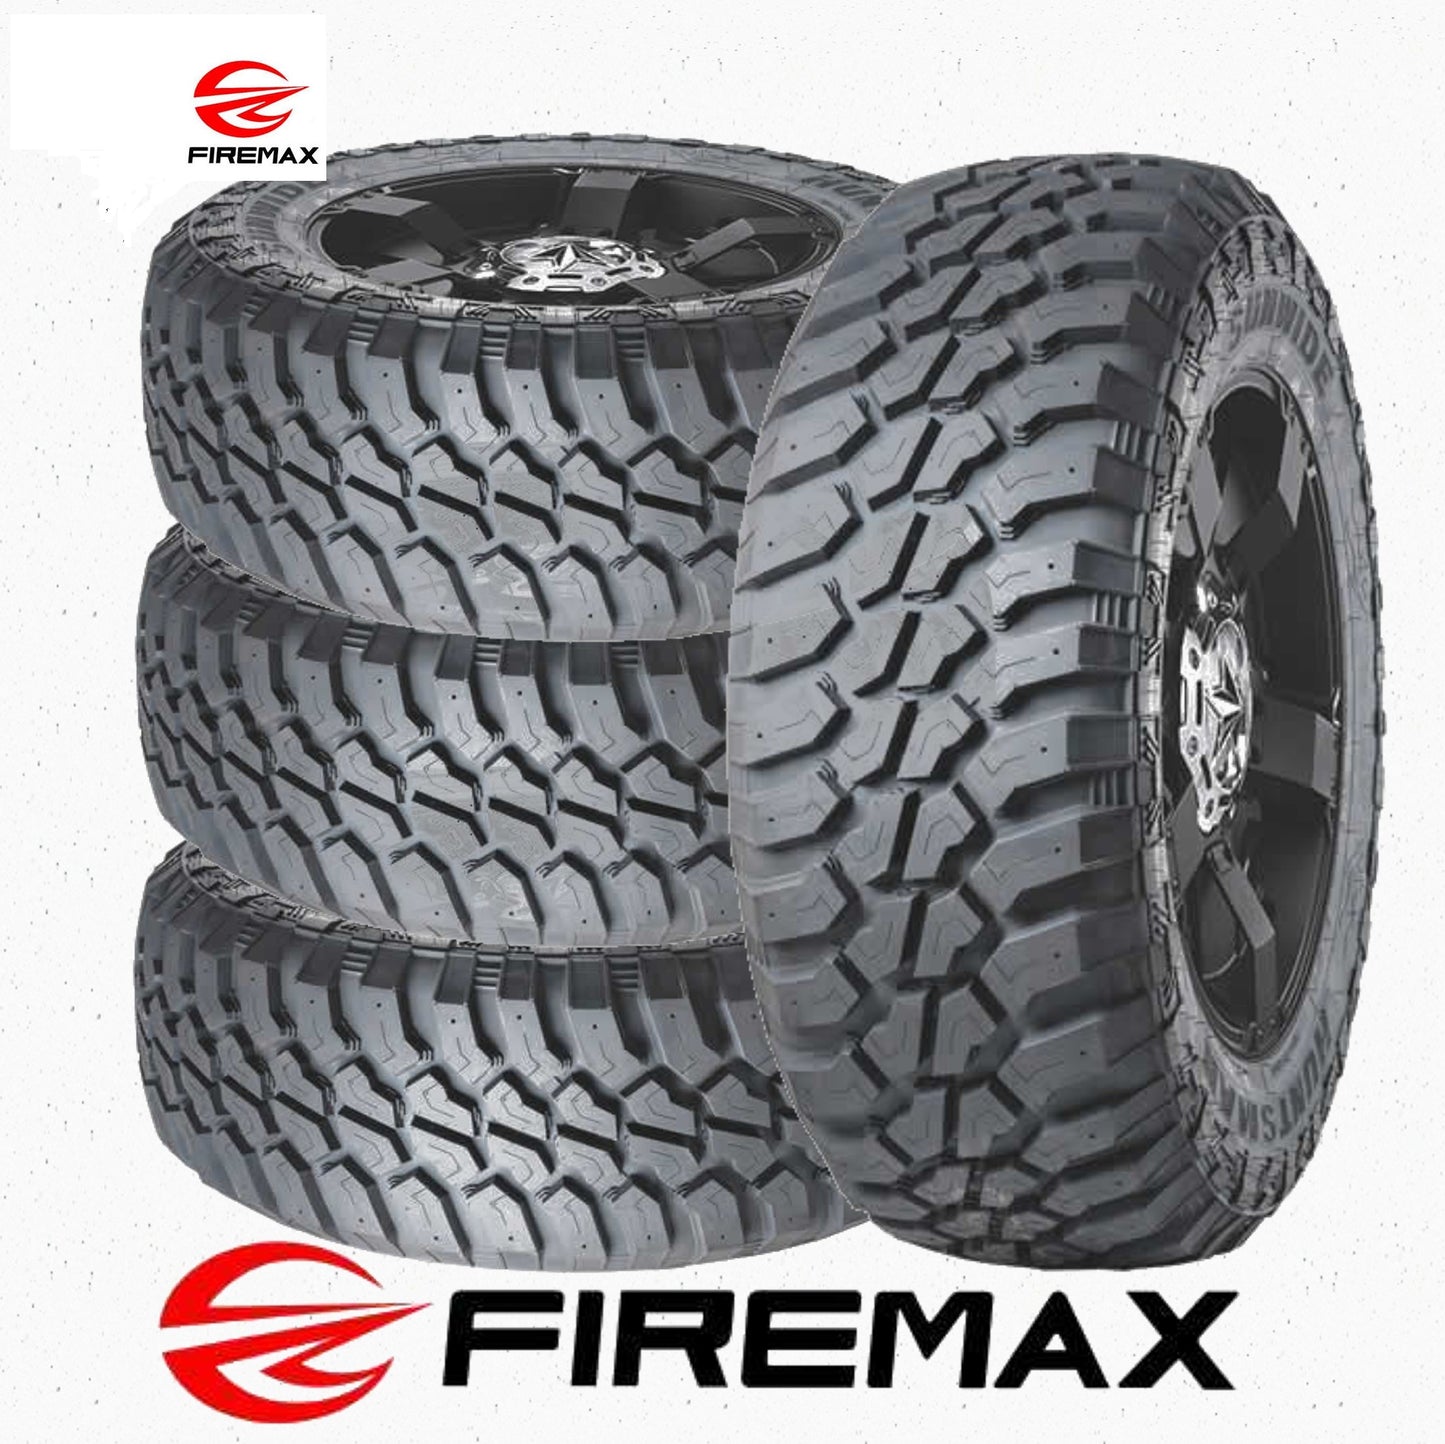 FIREMAX  MUD TIRES!  M/T FOR TRUCKS AND JEEPS!